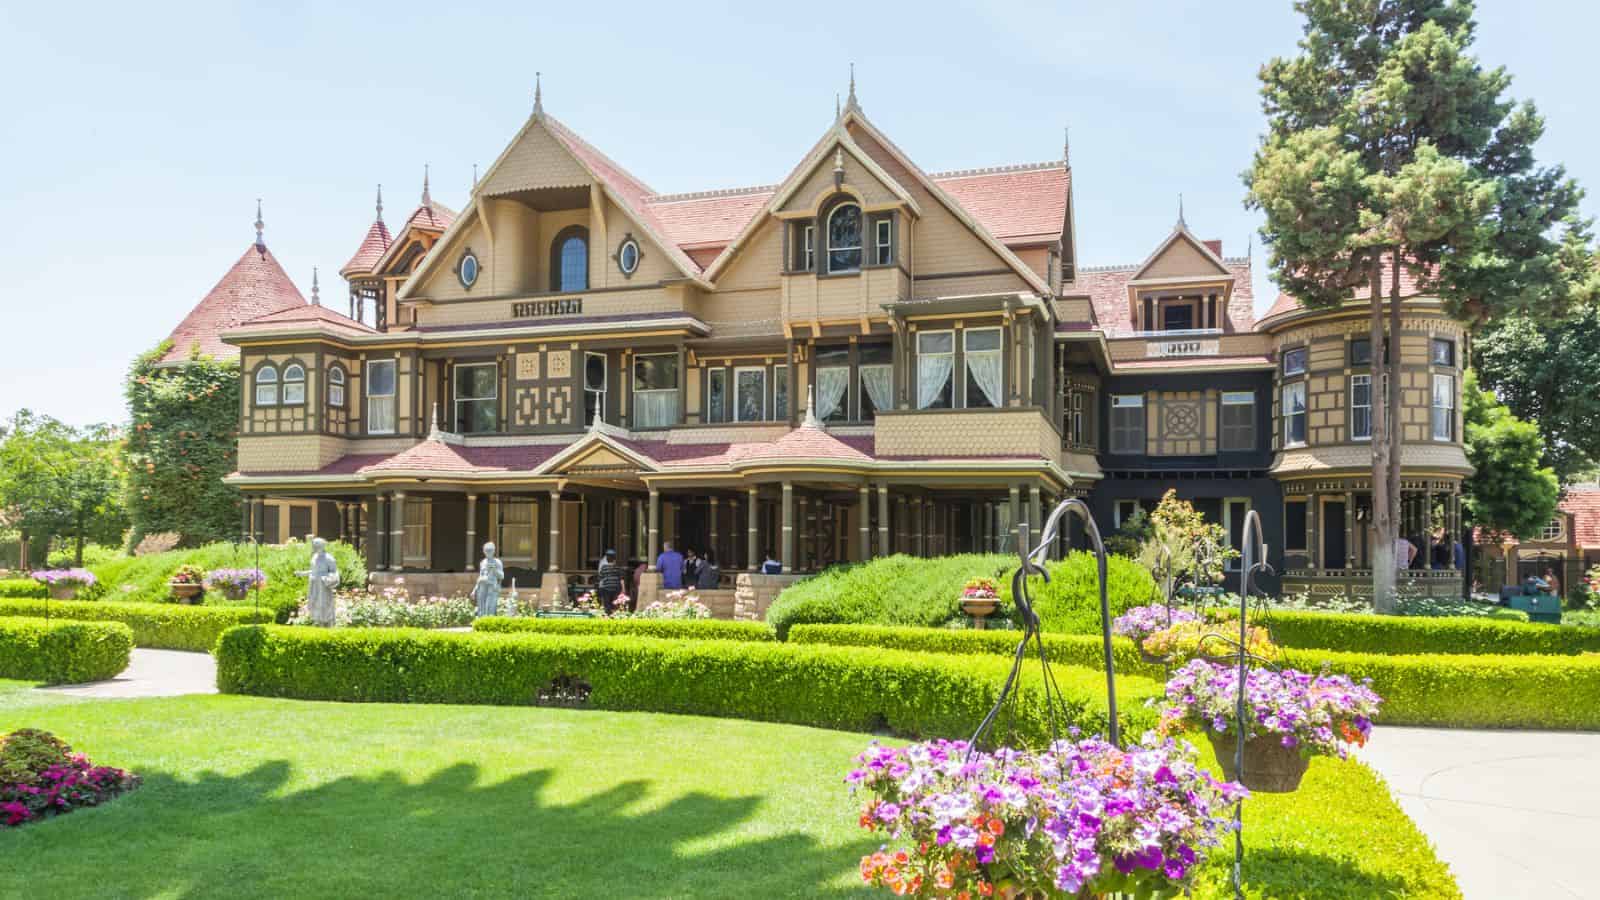 <p><span>Sarah Winchester took her fear of being haunted by gun victims and built it into a house so confusing the spirits might need a map. </span></p><p><a href="https://en.wikipedia.org/wiki/Winchester_Mystery_House#:~:text=The%20house%20became%20a%20tourist,structure%20and%20its%20former%20owner."><span>Wikipedia states</span></a><span> that the house transformed into a captivating tourist spot nine months after Winchester’s passing in 1922. The Victorian and Gothic-style mansion stands out for its size, architectural wonders, and myriad myths and legends enveloping the structure and its previous owner.</span></p>